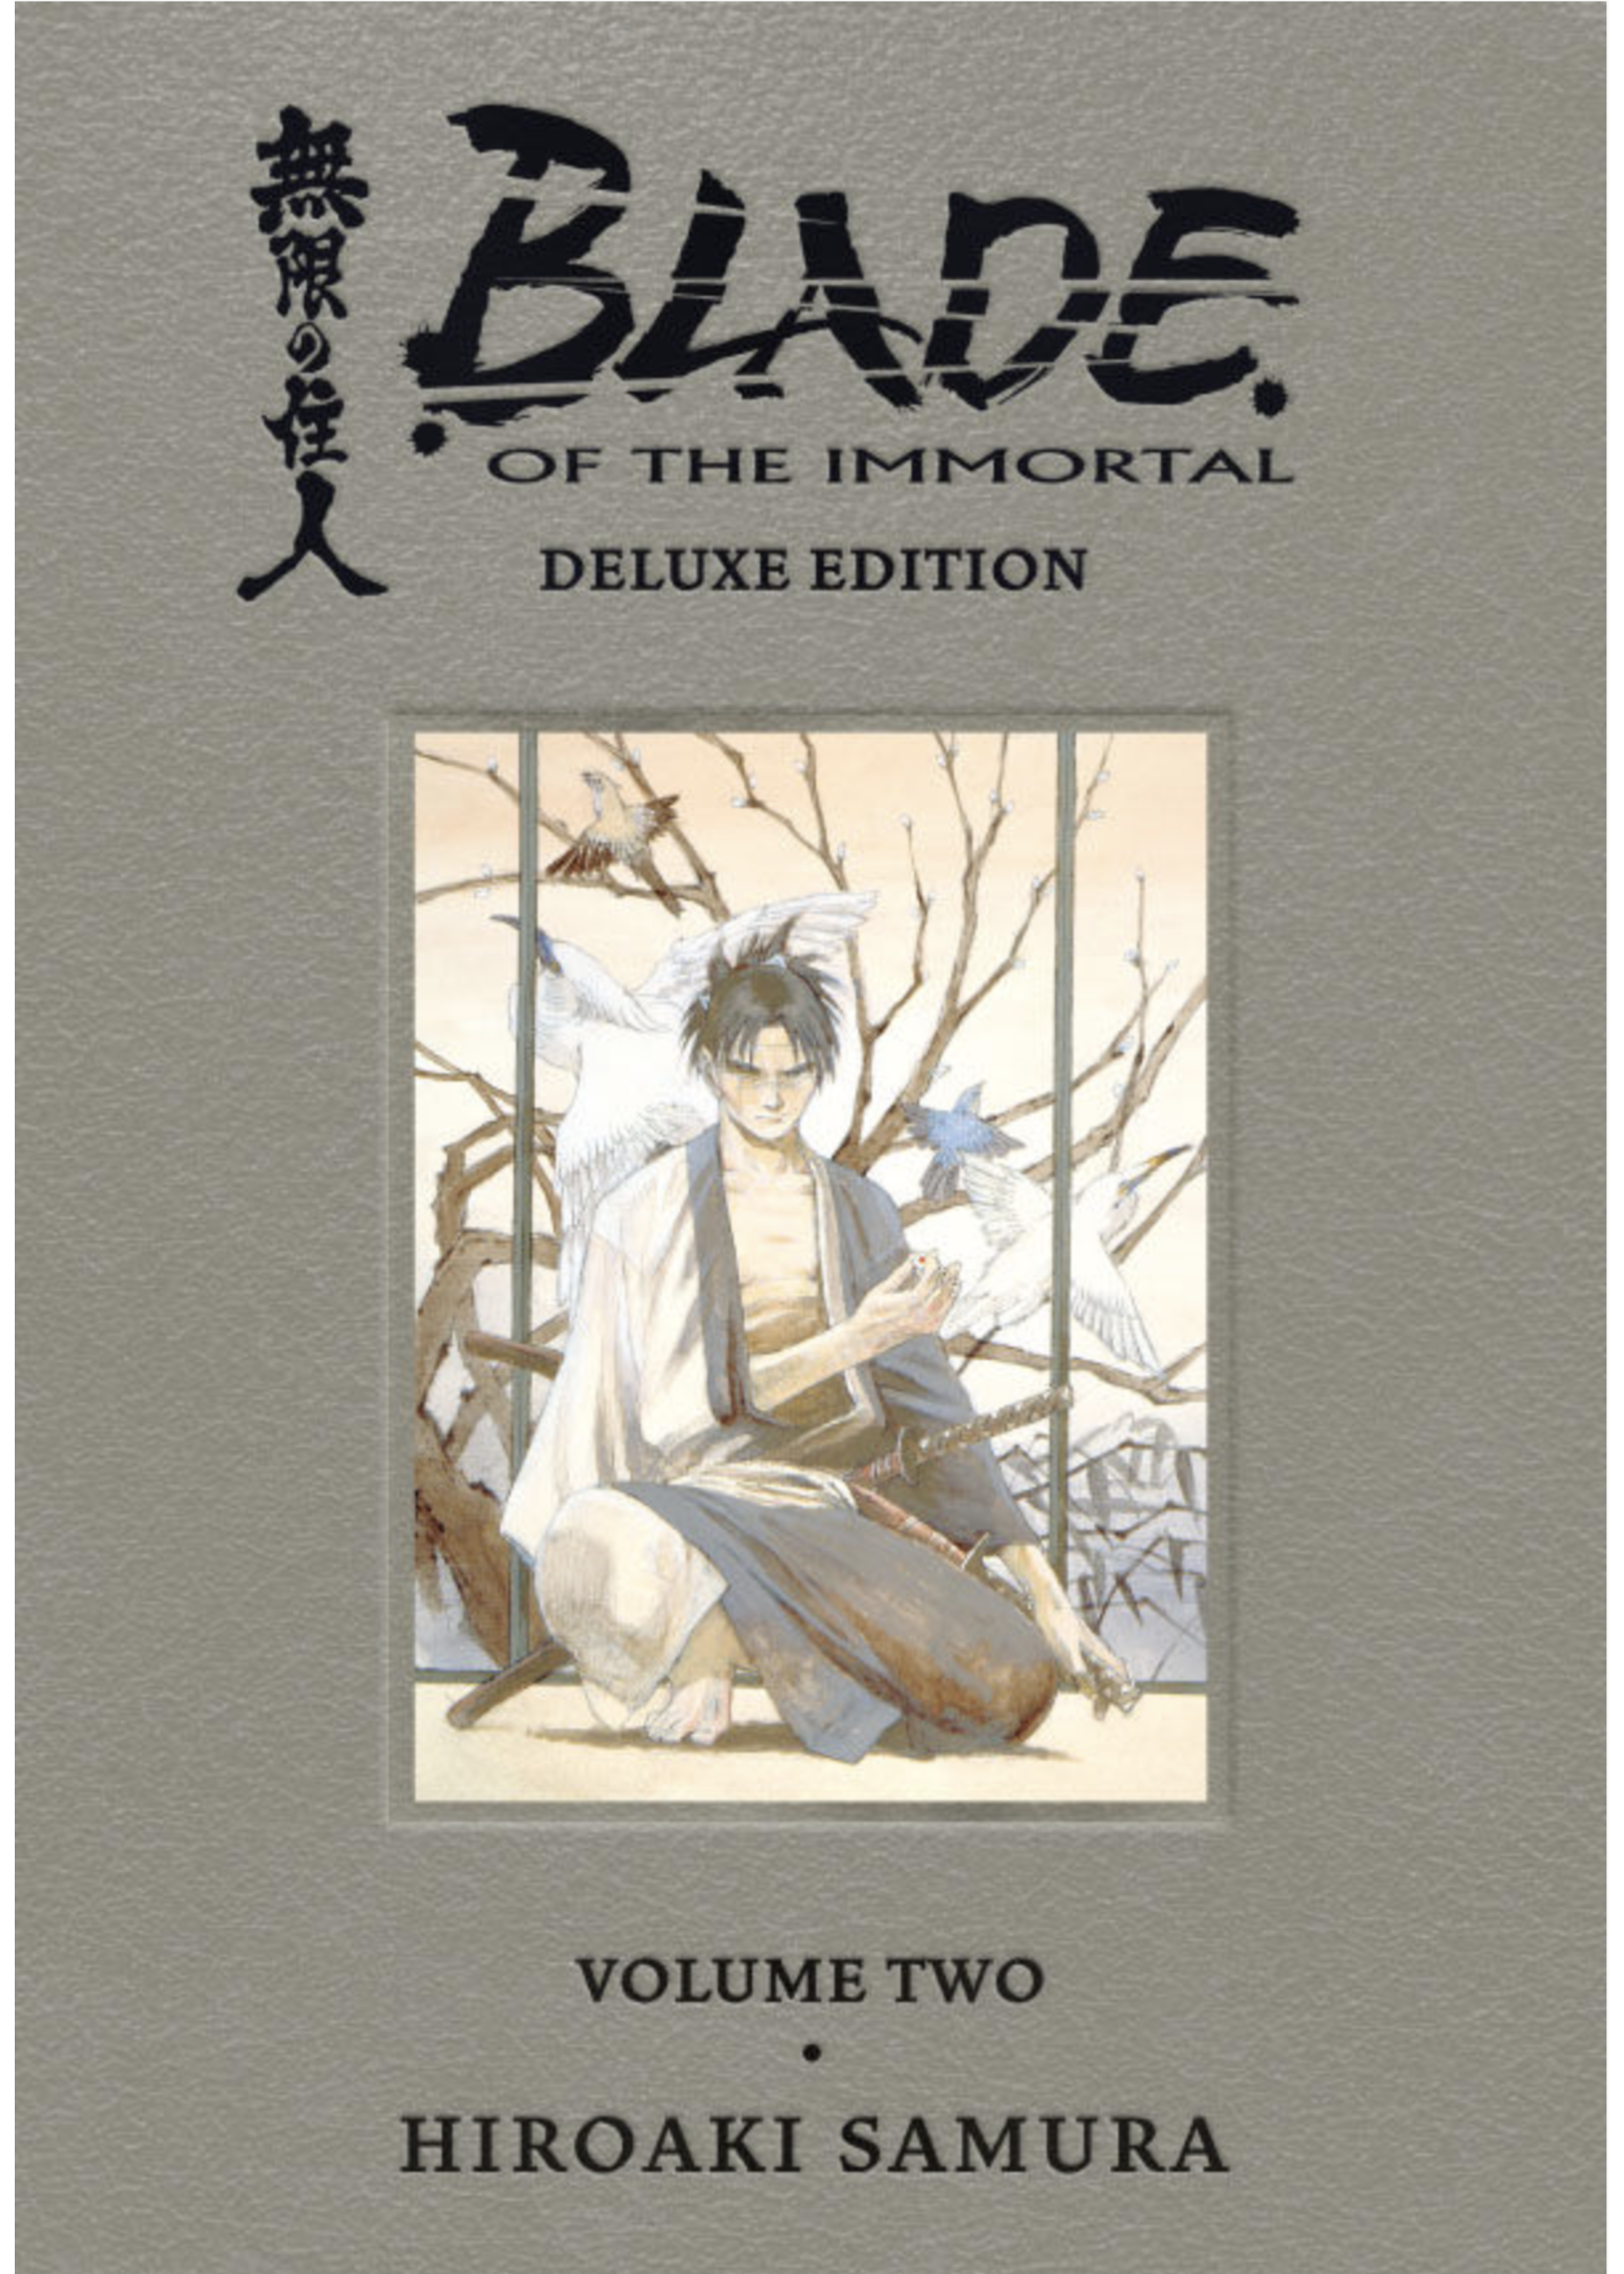 Blade of the Immortal Deluxe Volume 2